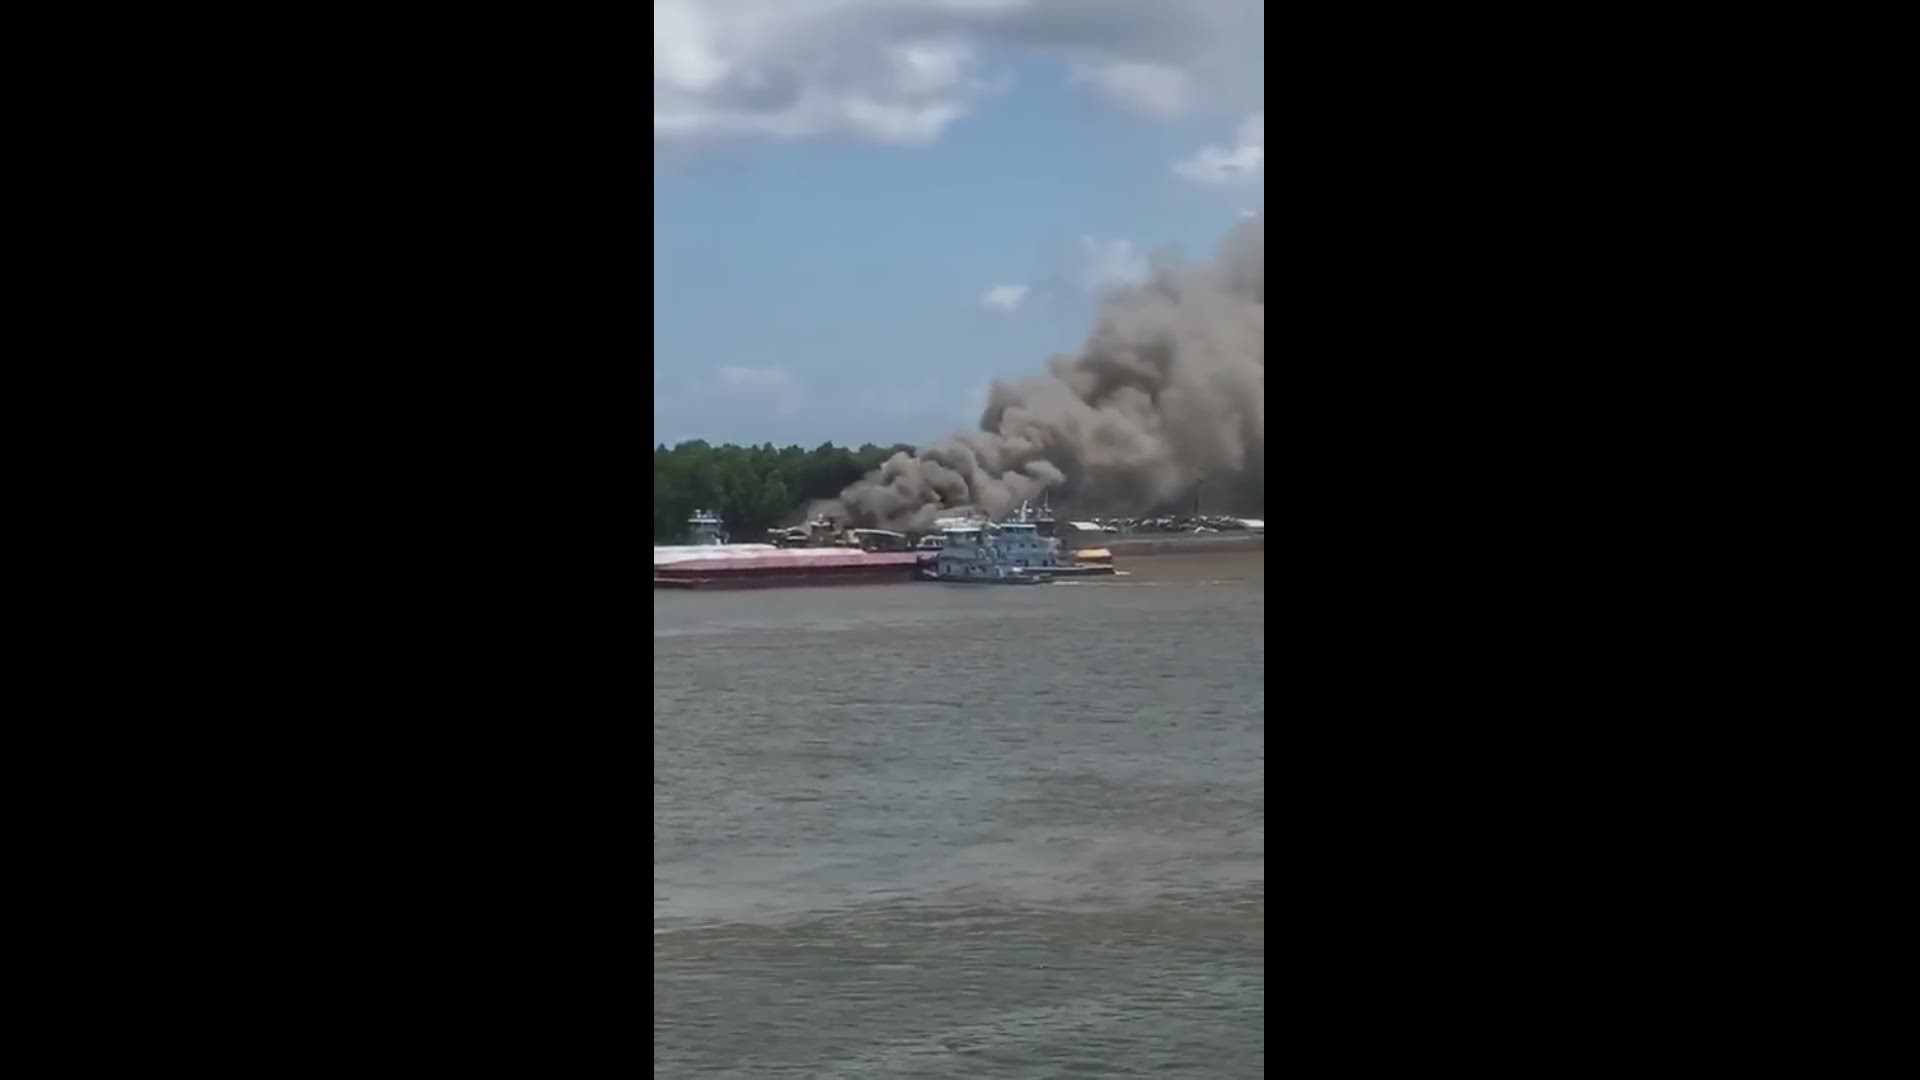 Viewer submitted video shows several scrap cars on a barge on fire.